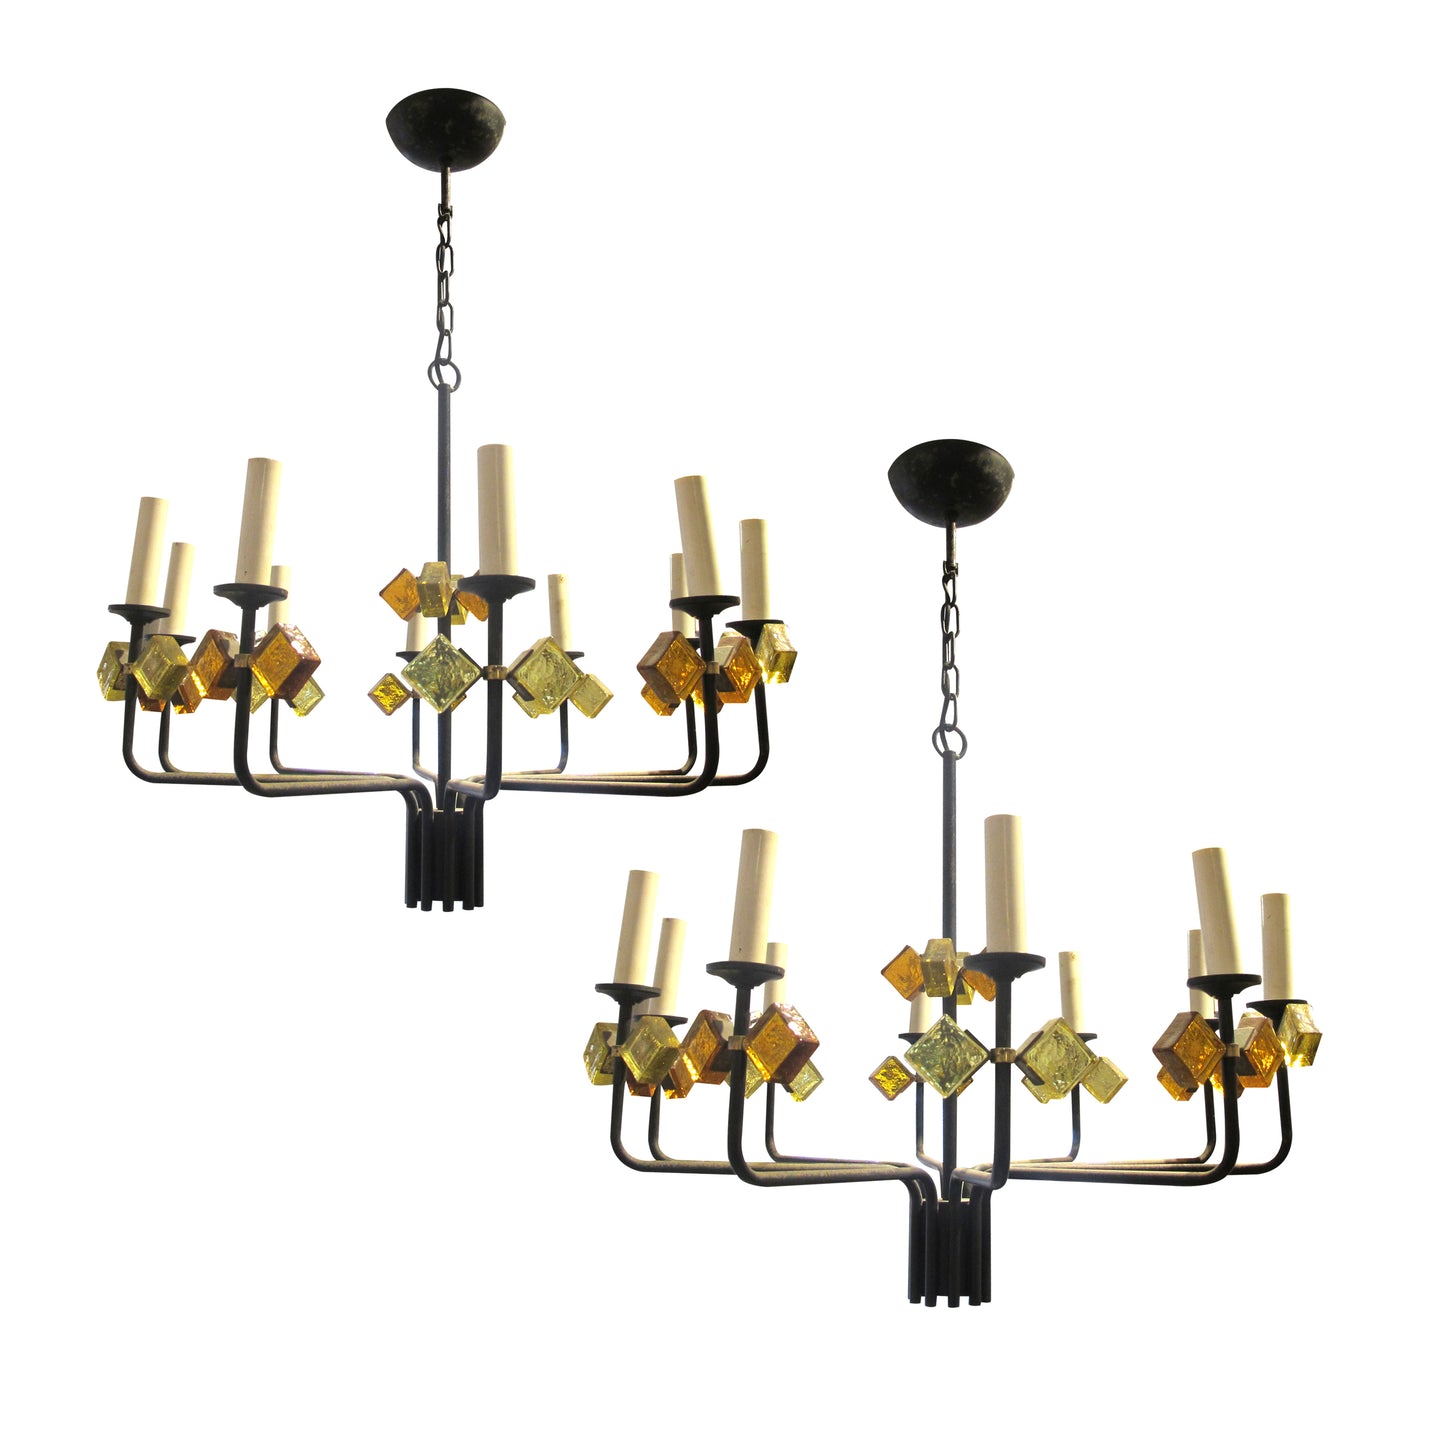 1950s Danish Pair of Iron and Coloured Glass Chandelier By Svend Aage Holm Sorensen